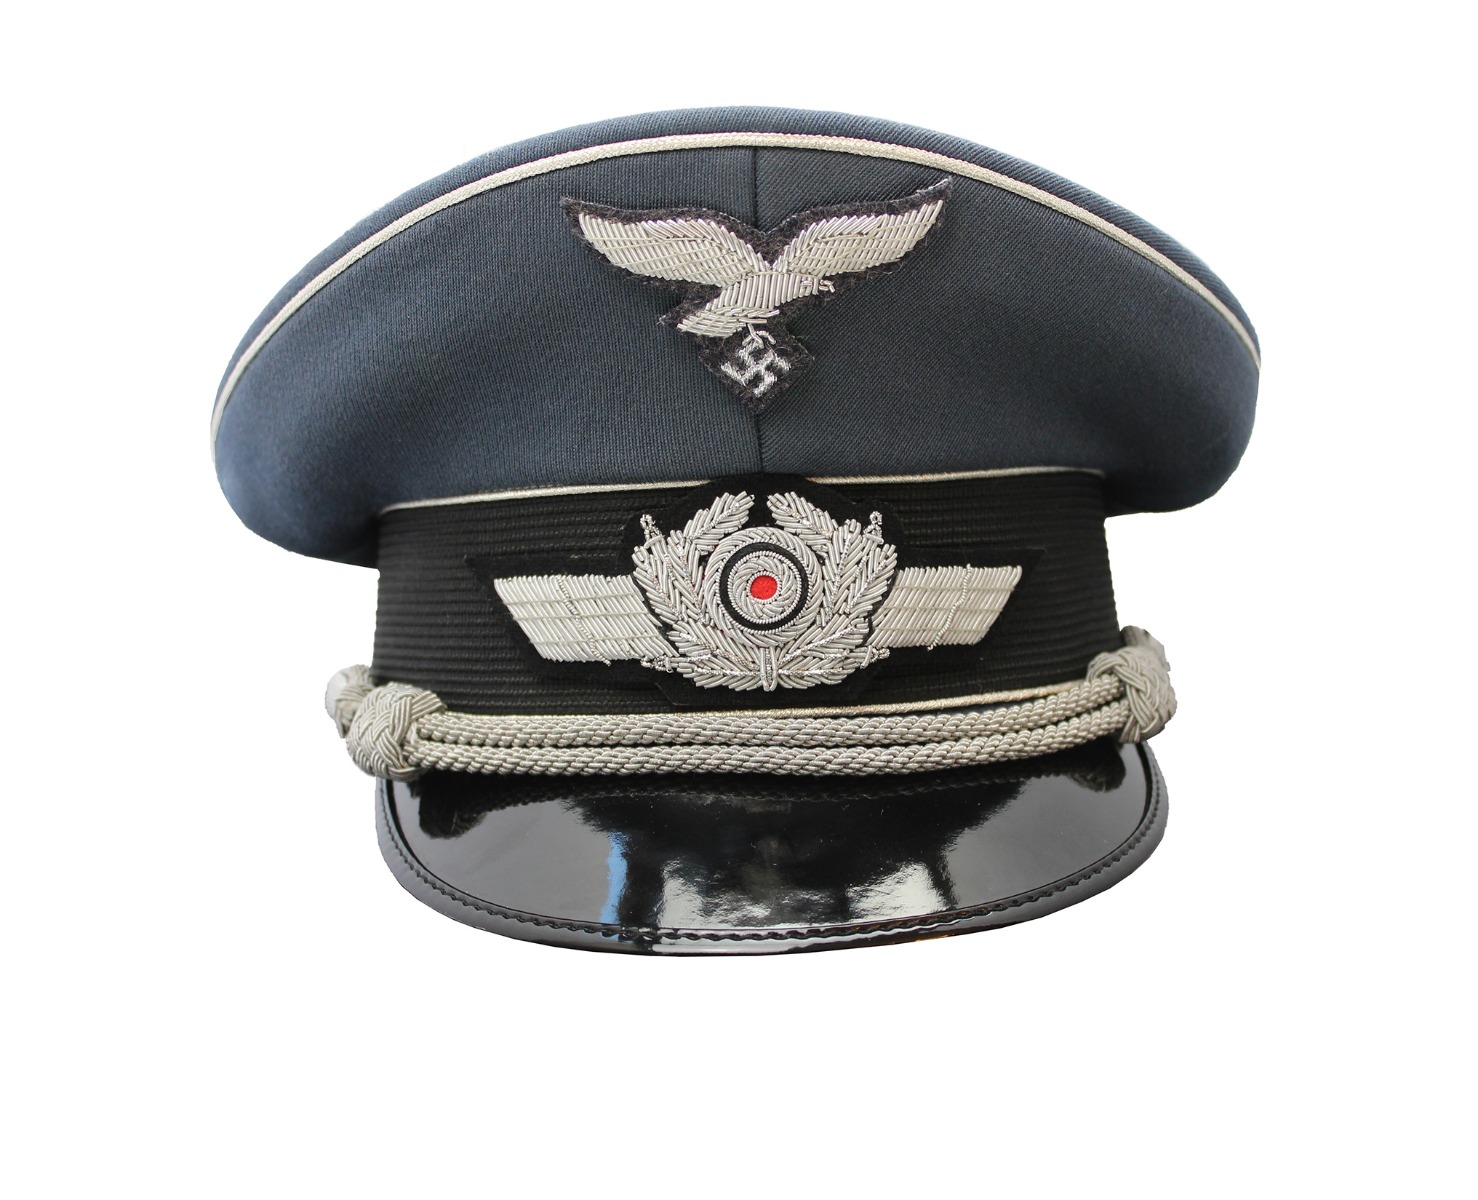 GERMAN WW2 LUFTWAFFE OFFICER'S VISOR CAP WITH SILVER PIPING 